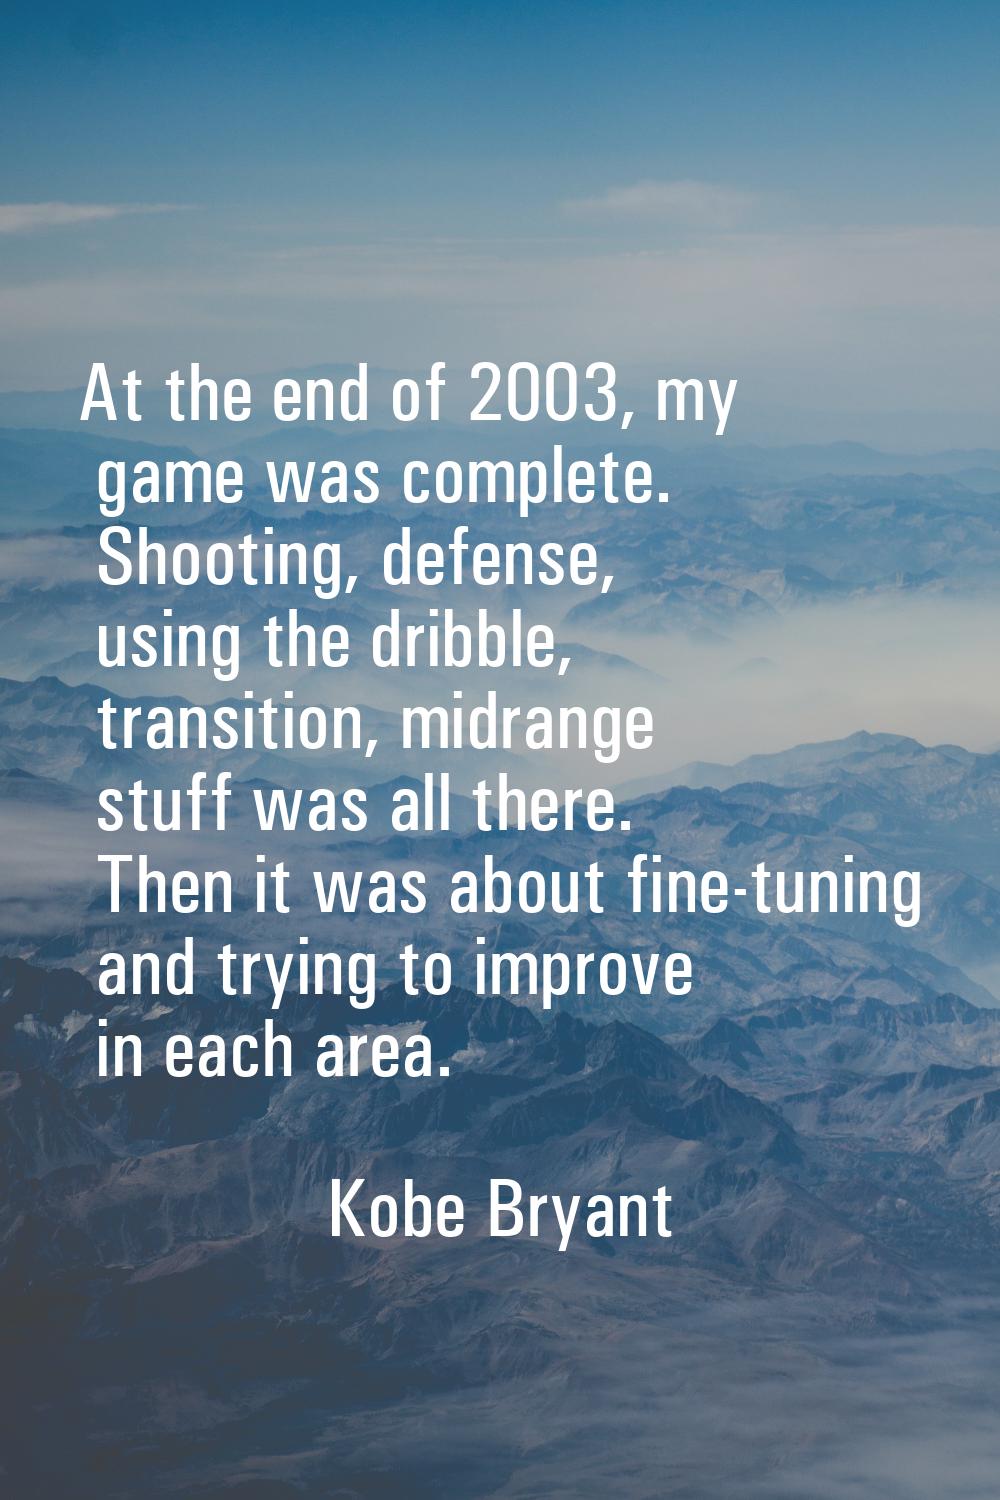 At the end of 2003, my game was complete. Shooting, defense, using the dribble, transition, midrang